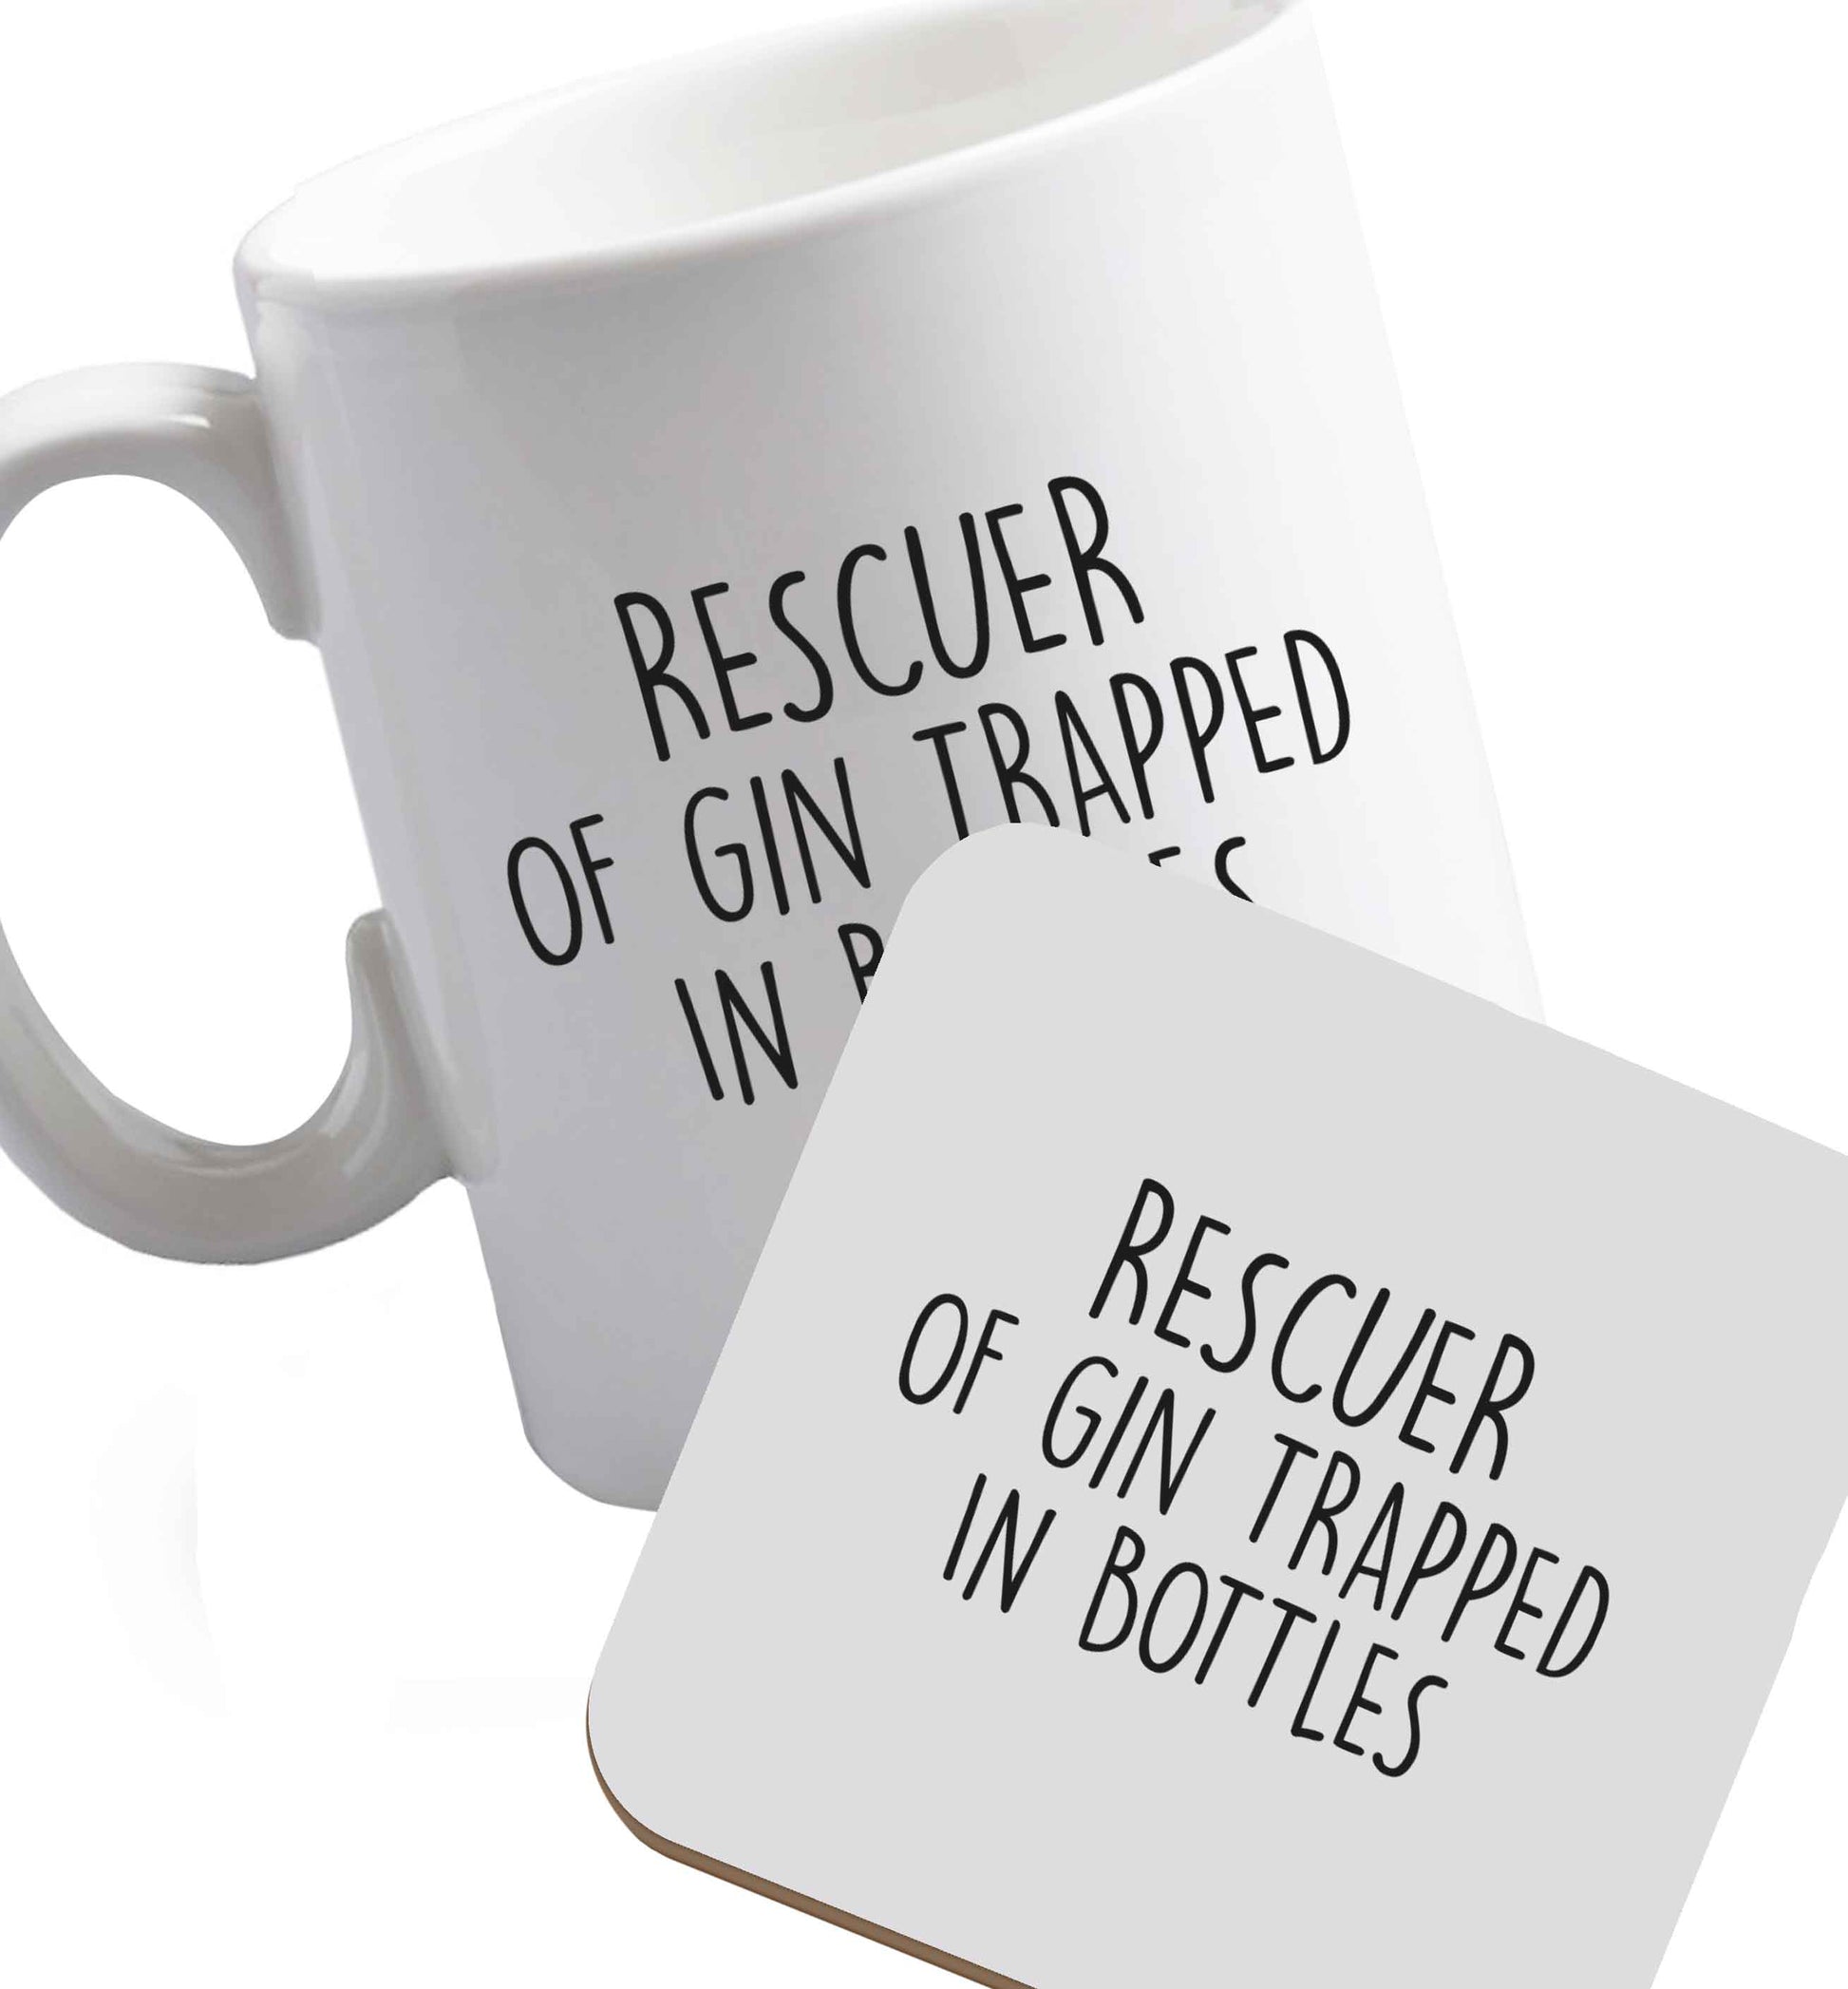 10 oz Rescuer of Gin Trapped in Bottles ceramic mug and coaster set right handed